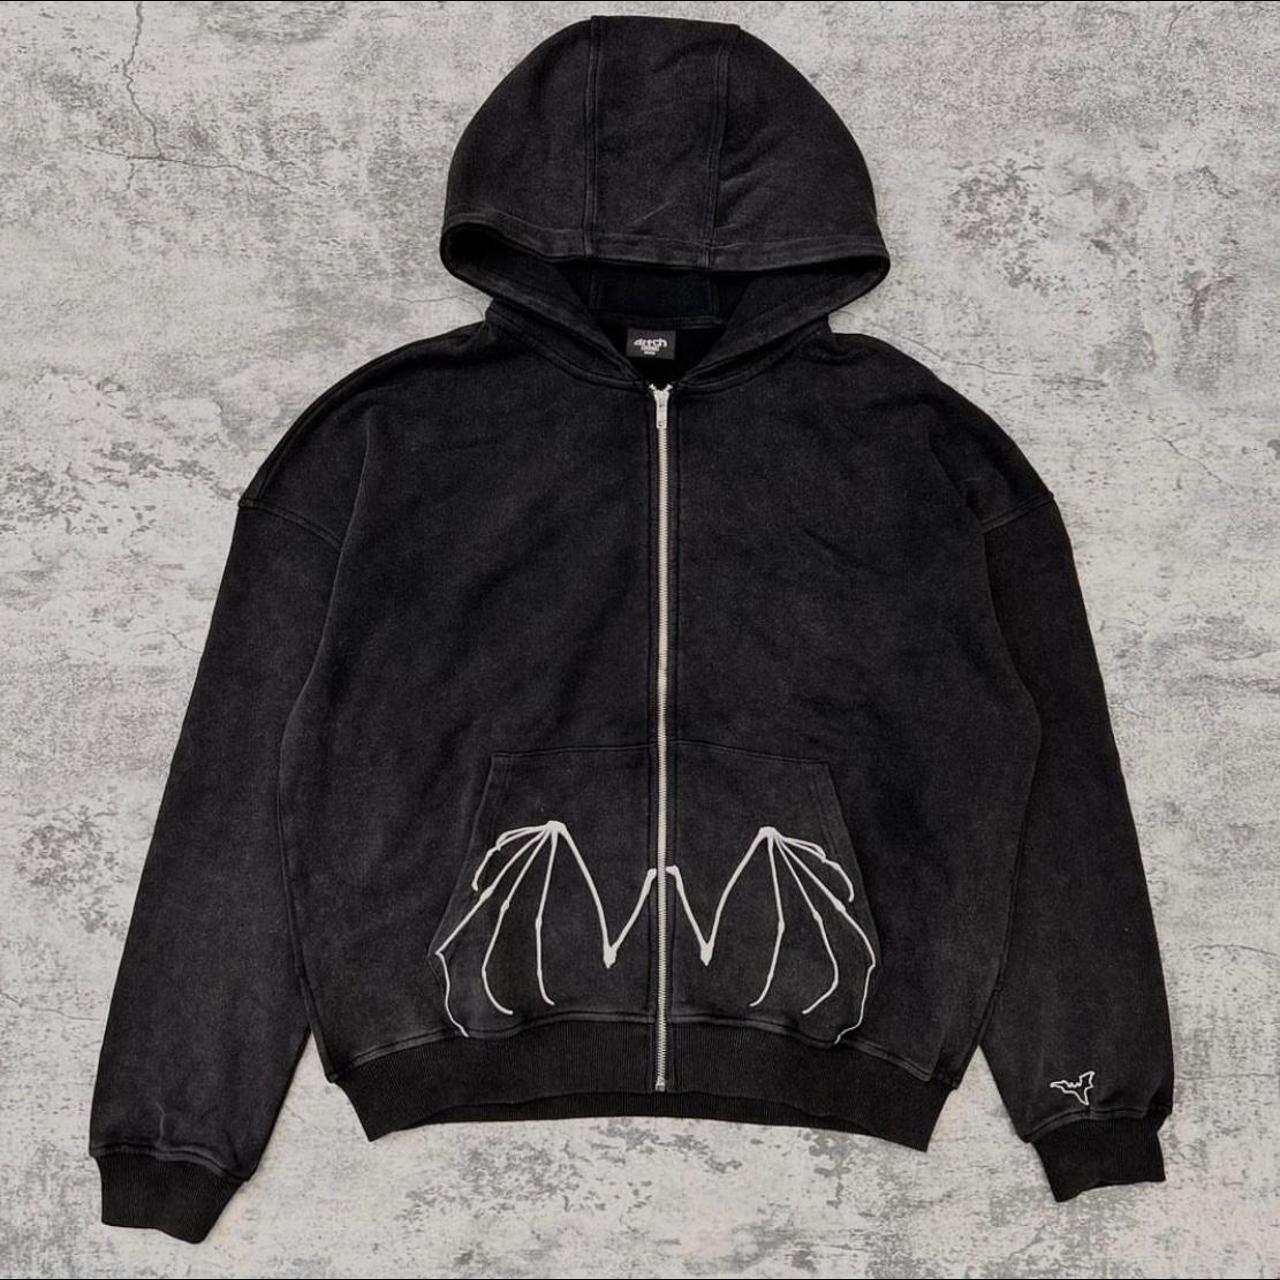 ditchla bat wing zip up (limited